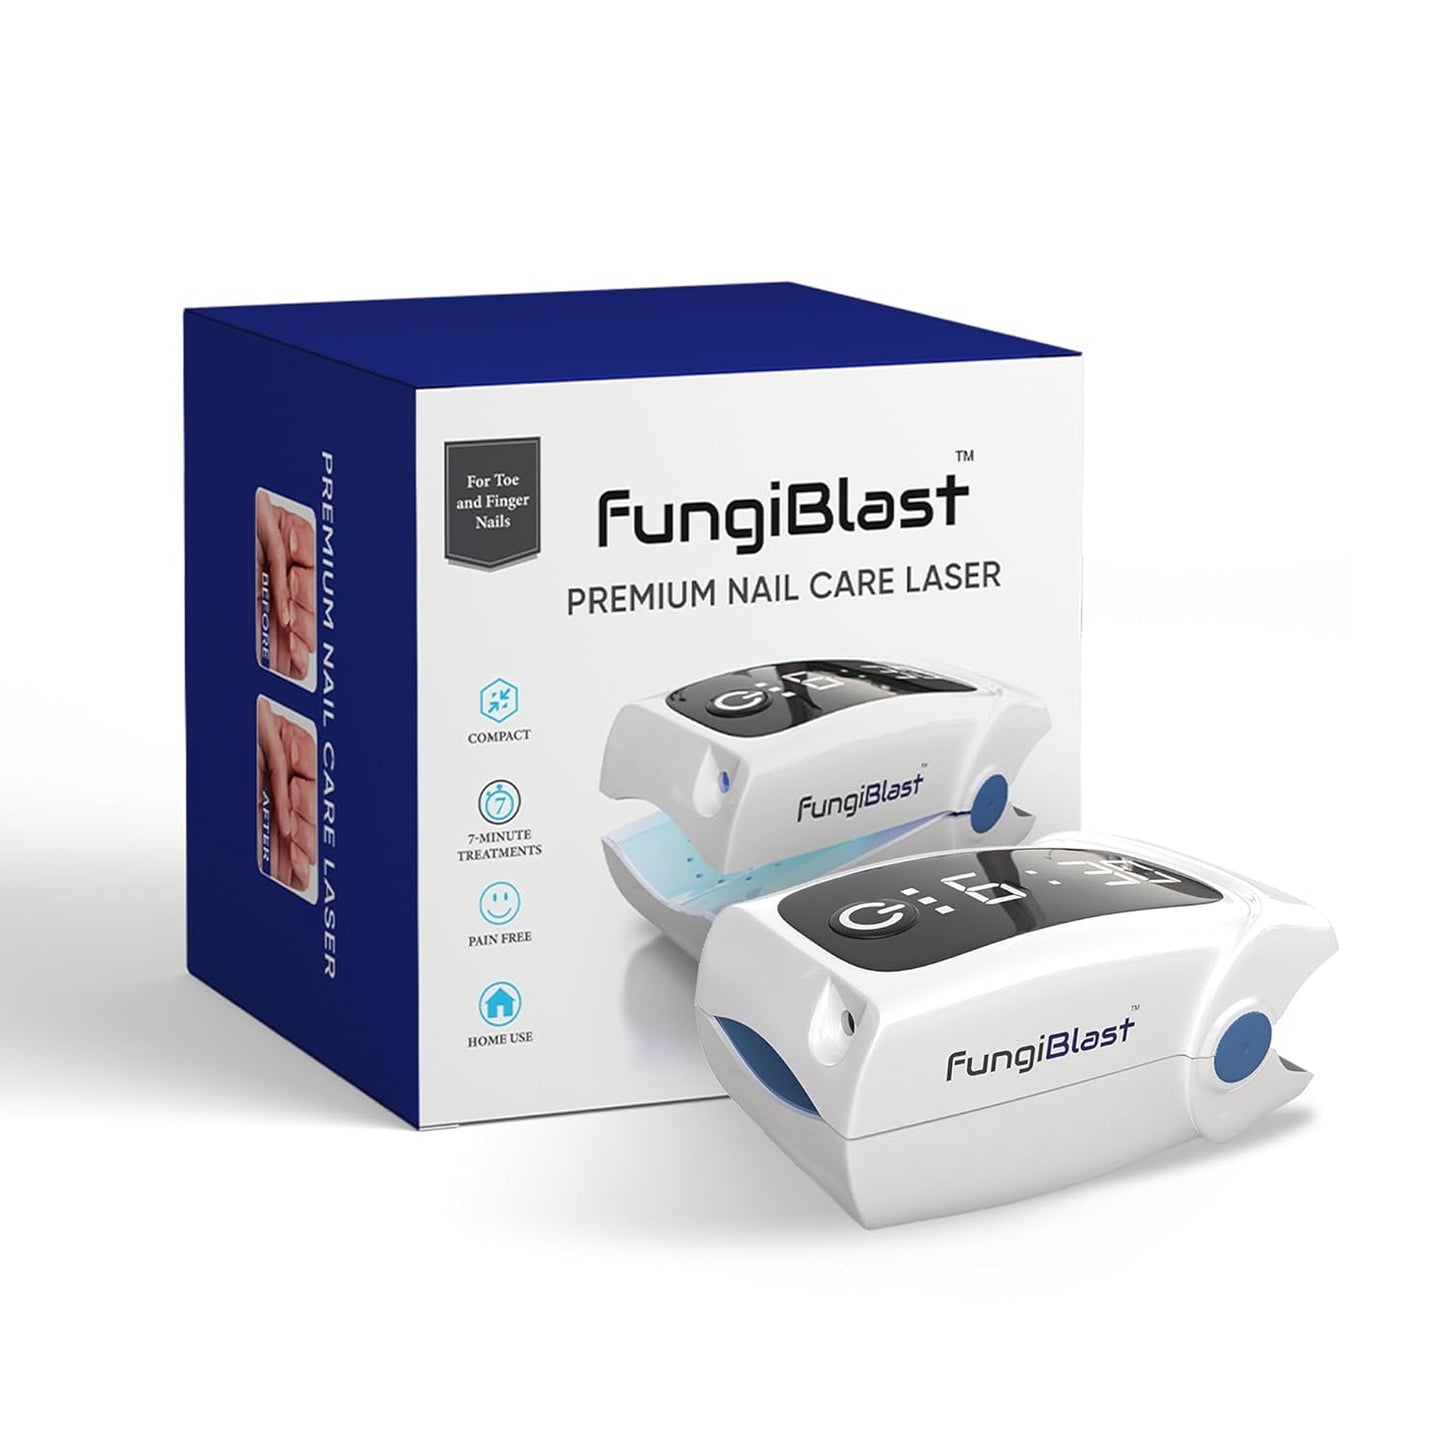 FungiBlast Nail Fungus Laser Treatment Device - Onychomycosis Laser Nail Treatment - Effective | Safe | Rechargeable home Laser Treatment for Damaged Discolored Unattractive Nails